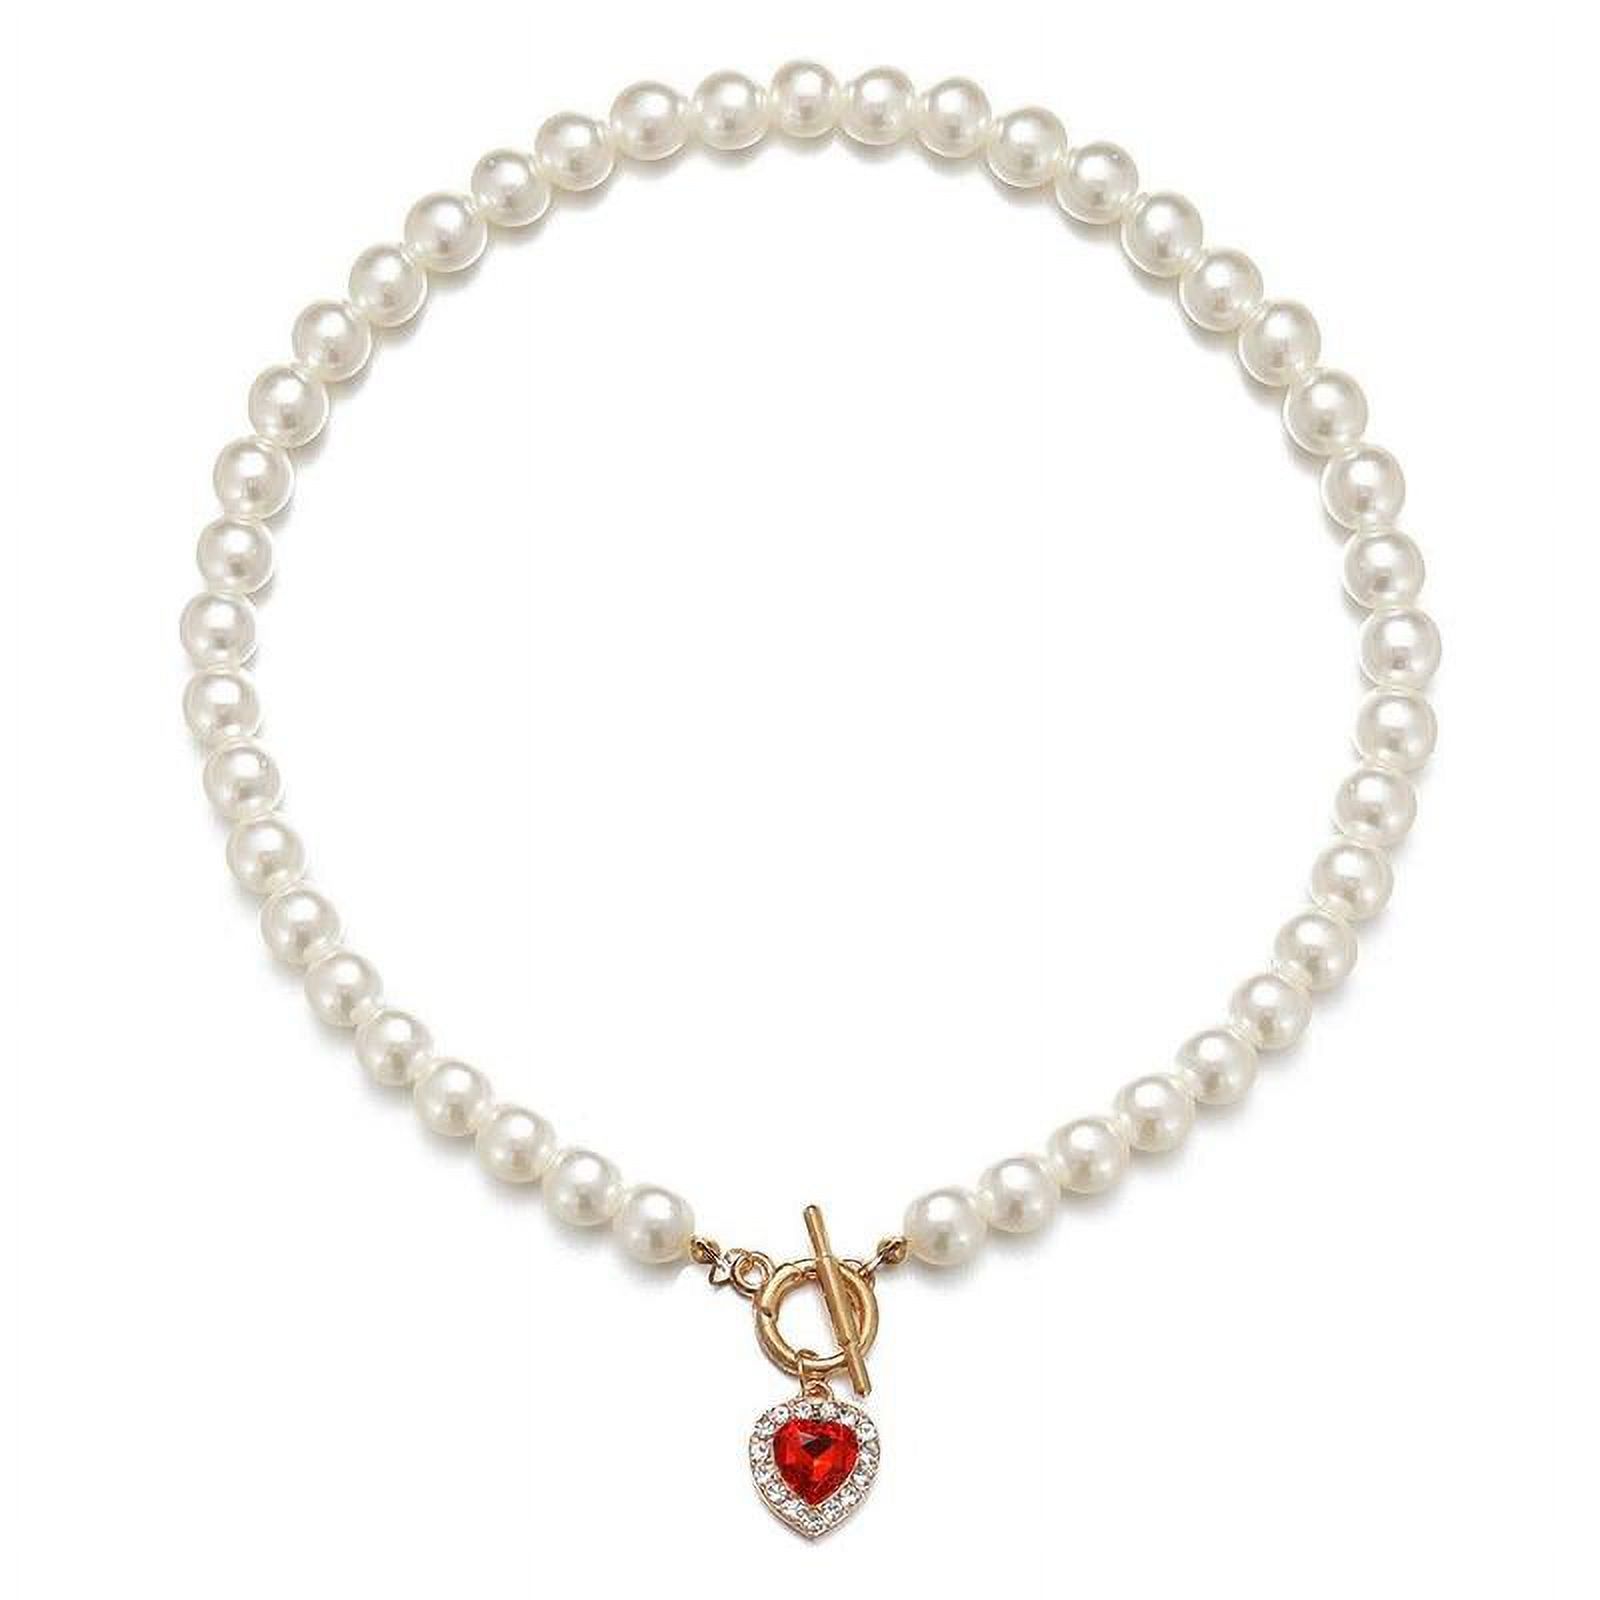 Vintage Pearl Necklace For Women Retro Red Crystal Heart Pendant Pearl Choker Necklaces Gifts Jewelry W1F0 - image 1 of 8